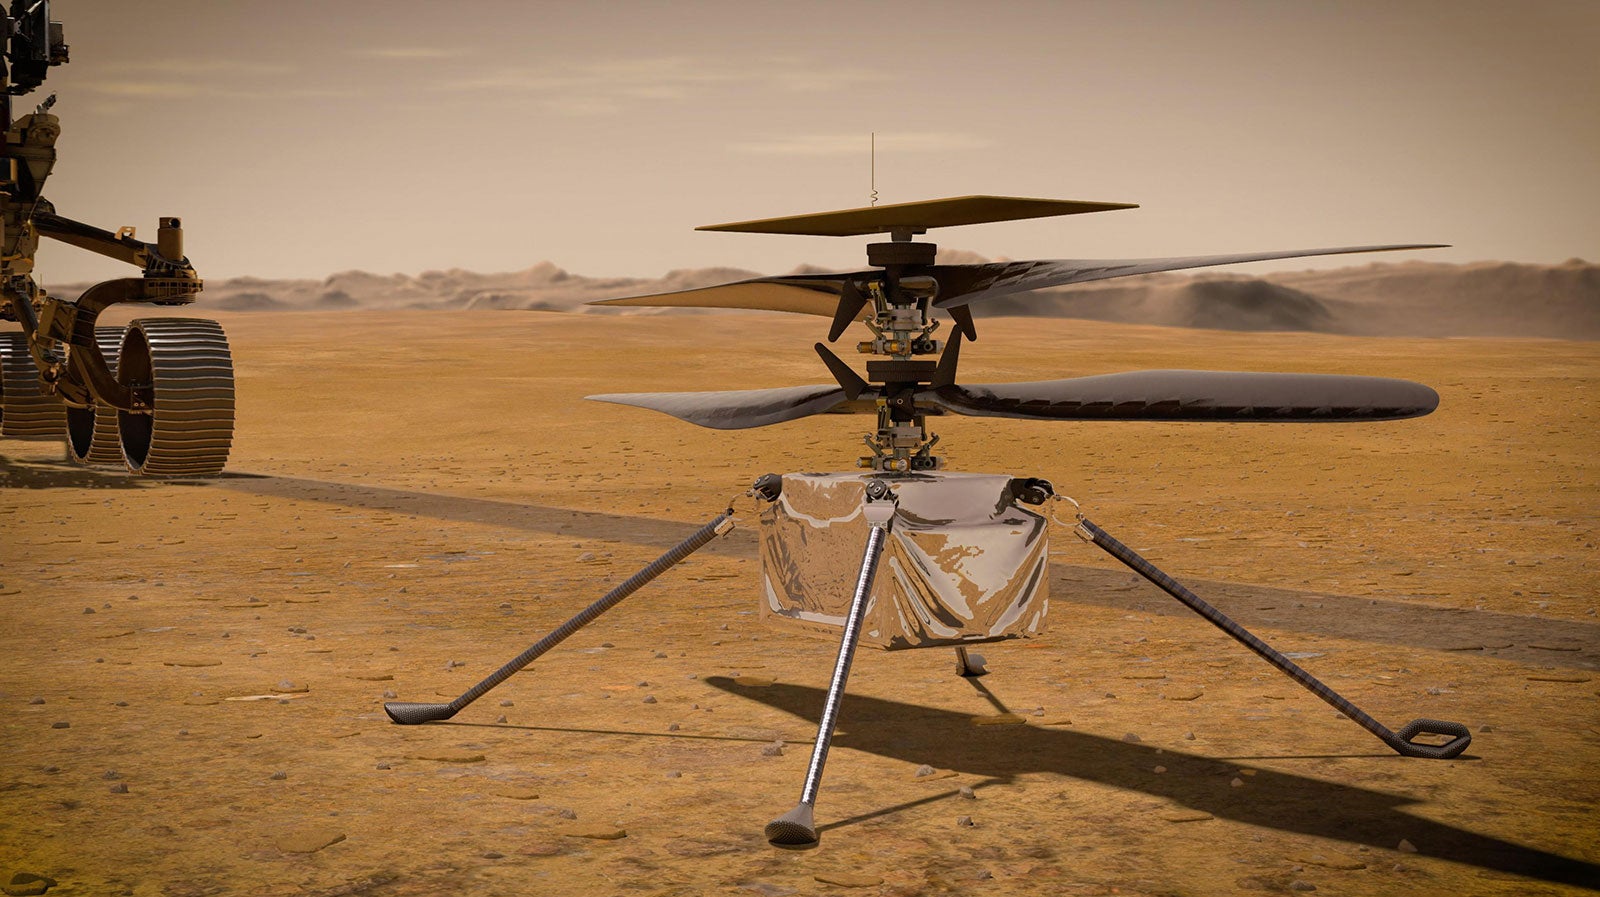 Concept image of NASA’s Ingenuity Mars Helicopter standing on the Red Planet’s surface